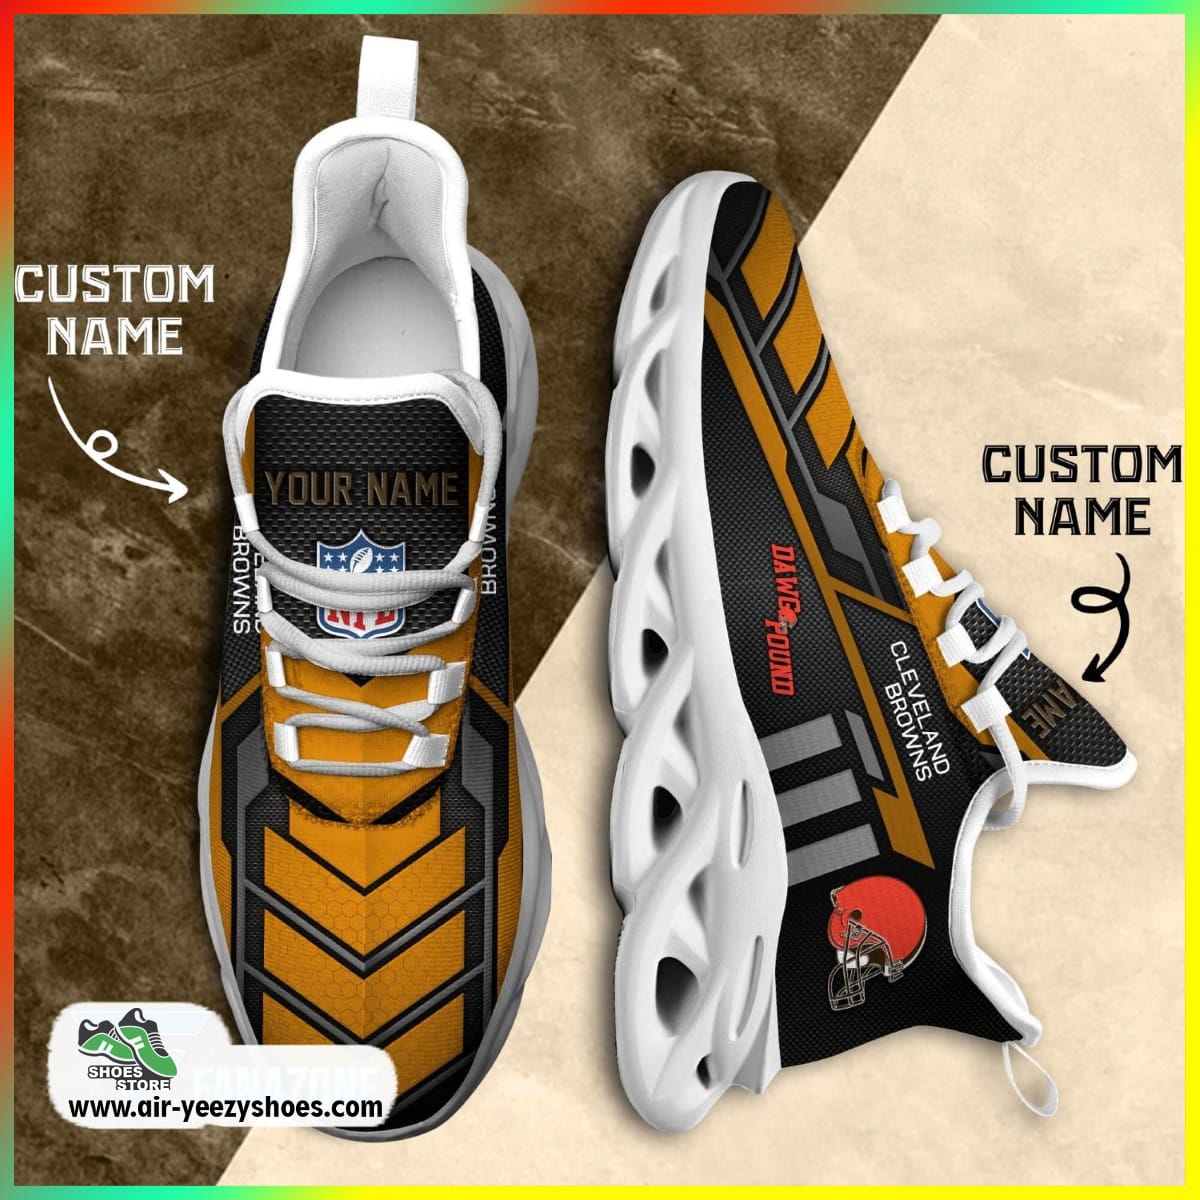 Cleveland Browns NFL Custom Sport Shoes For Fans, Cleveland Browns Fan Gears